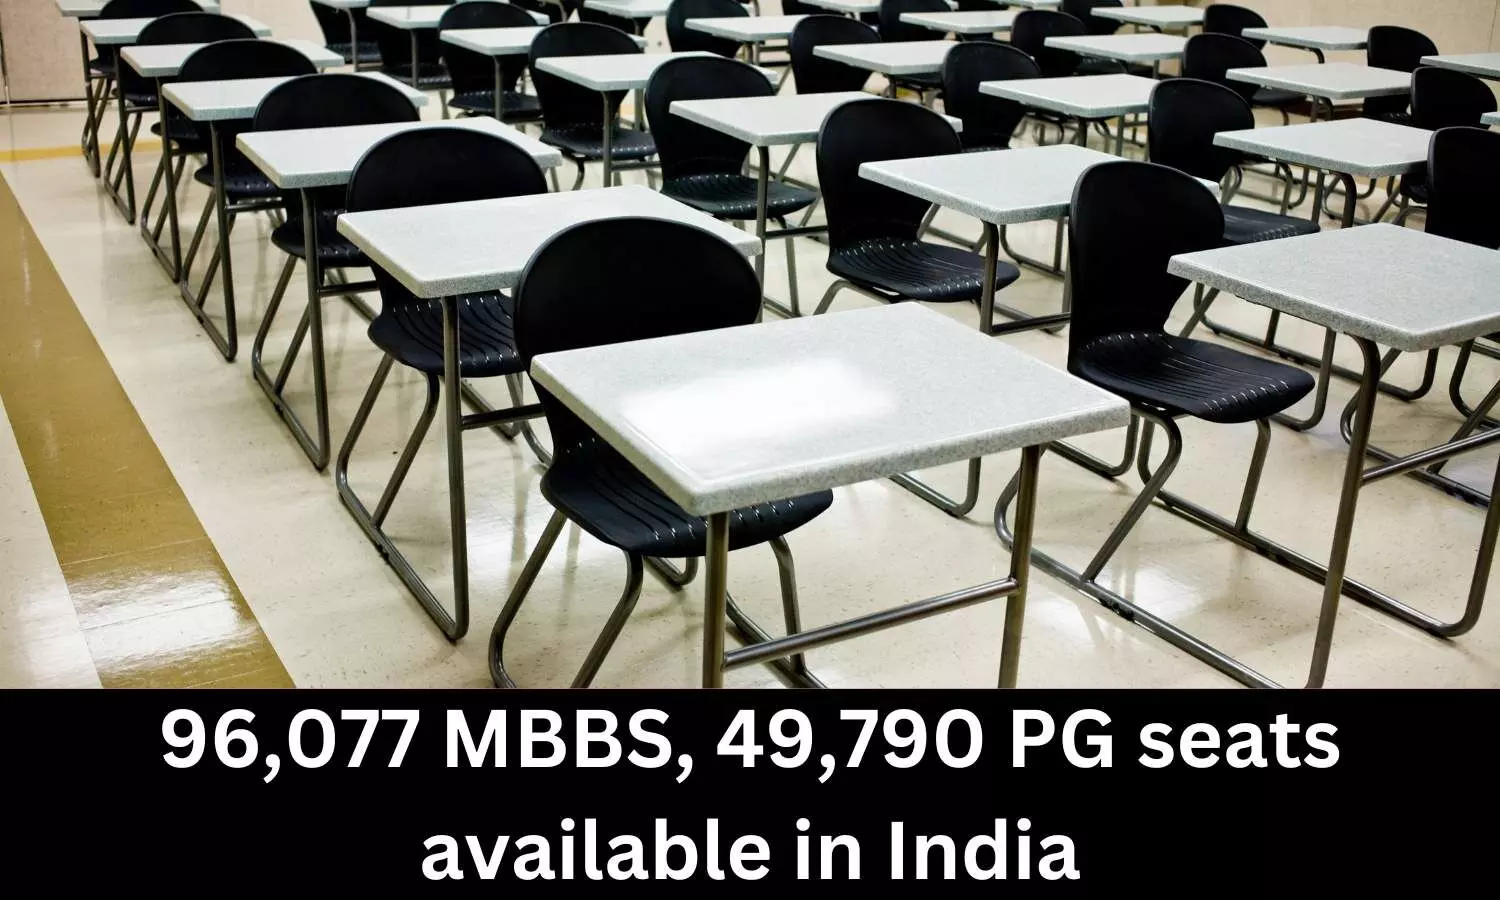 49,790 PG, 96,077 MBBS seats available in India: MoS Health